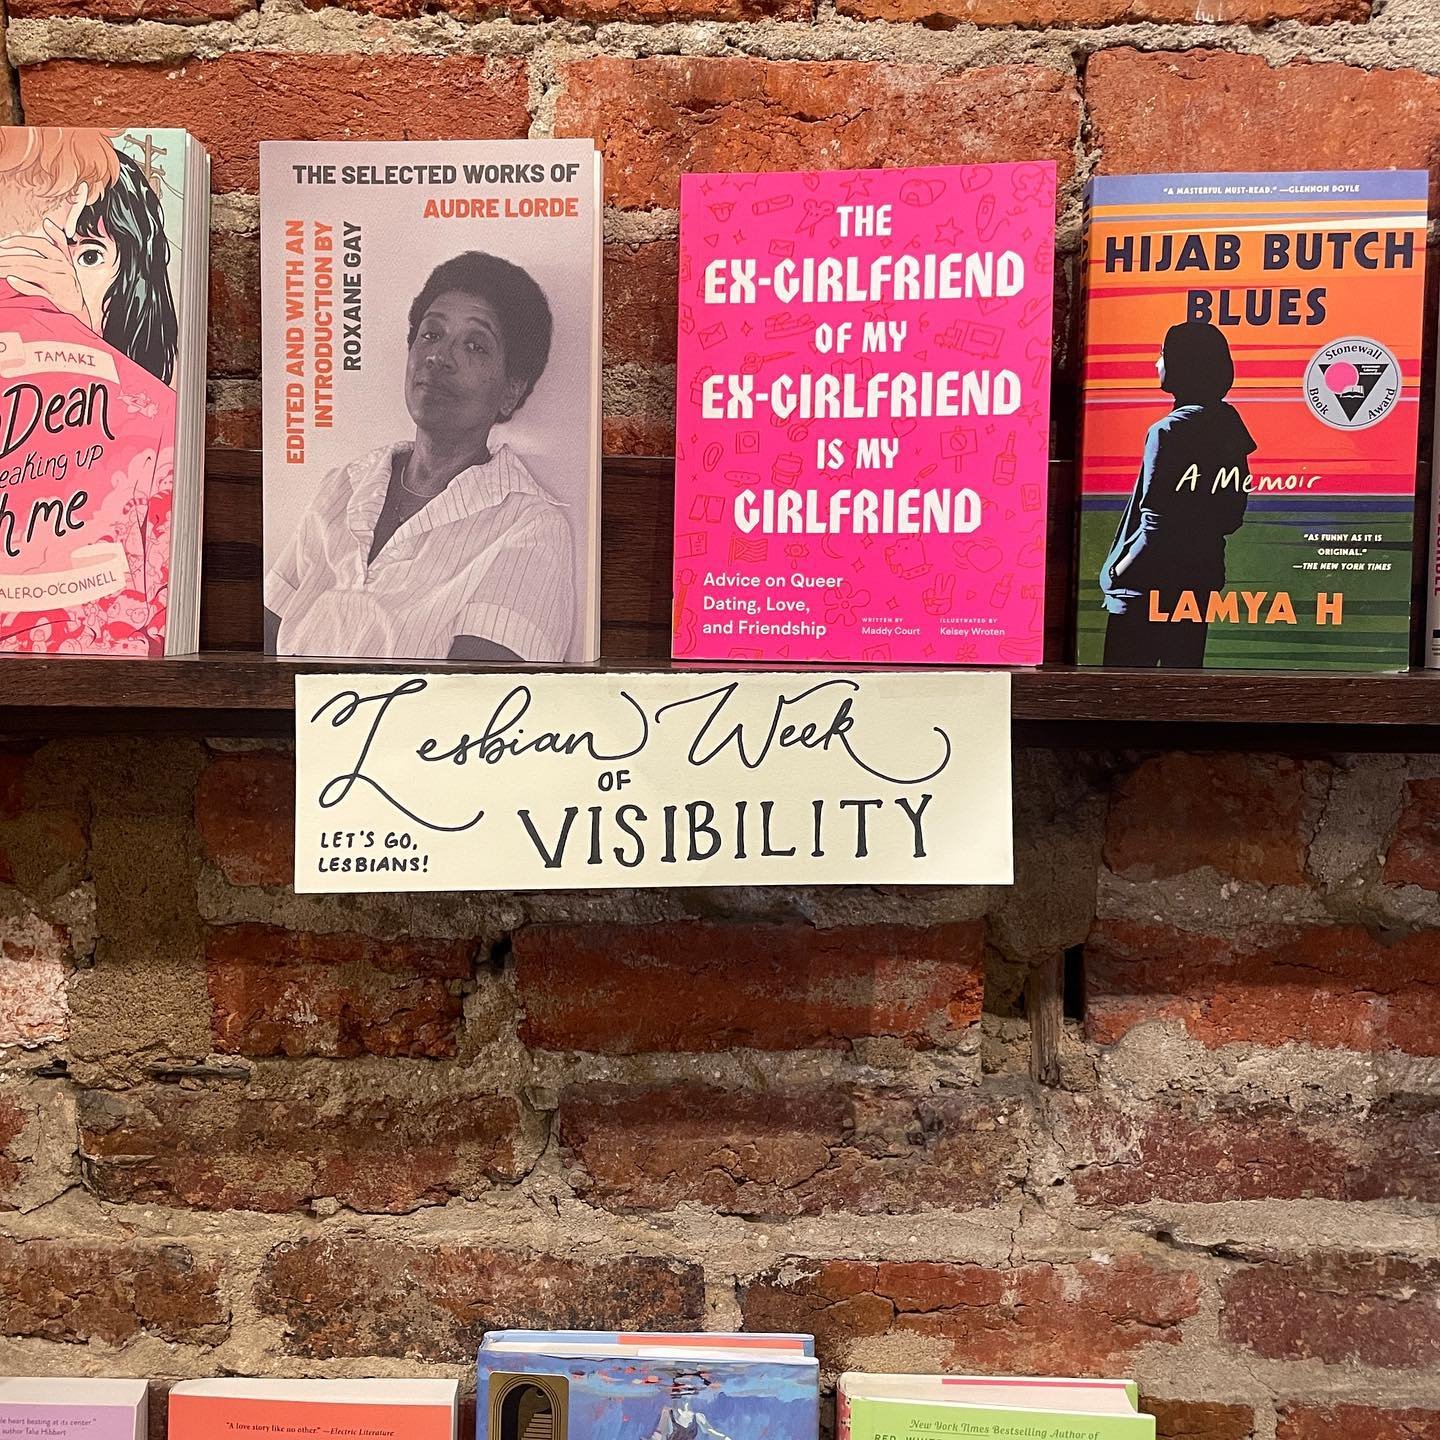 let&rsquo;s go, lesbians! it&rsquo;s lesbian visibility week &amp; we&rsquo;re showing off some of our favorite lesbian/queer writers &amp; characters on display 🧡🤍💗